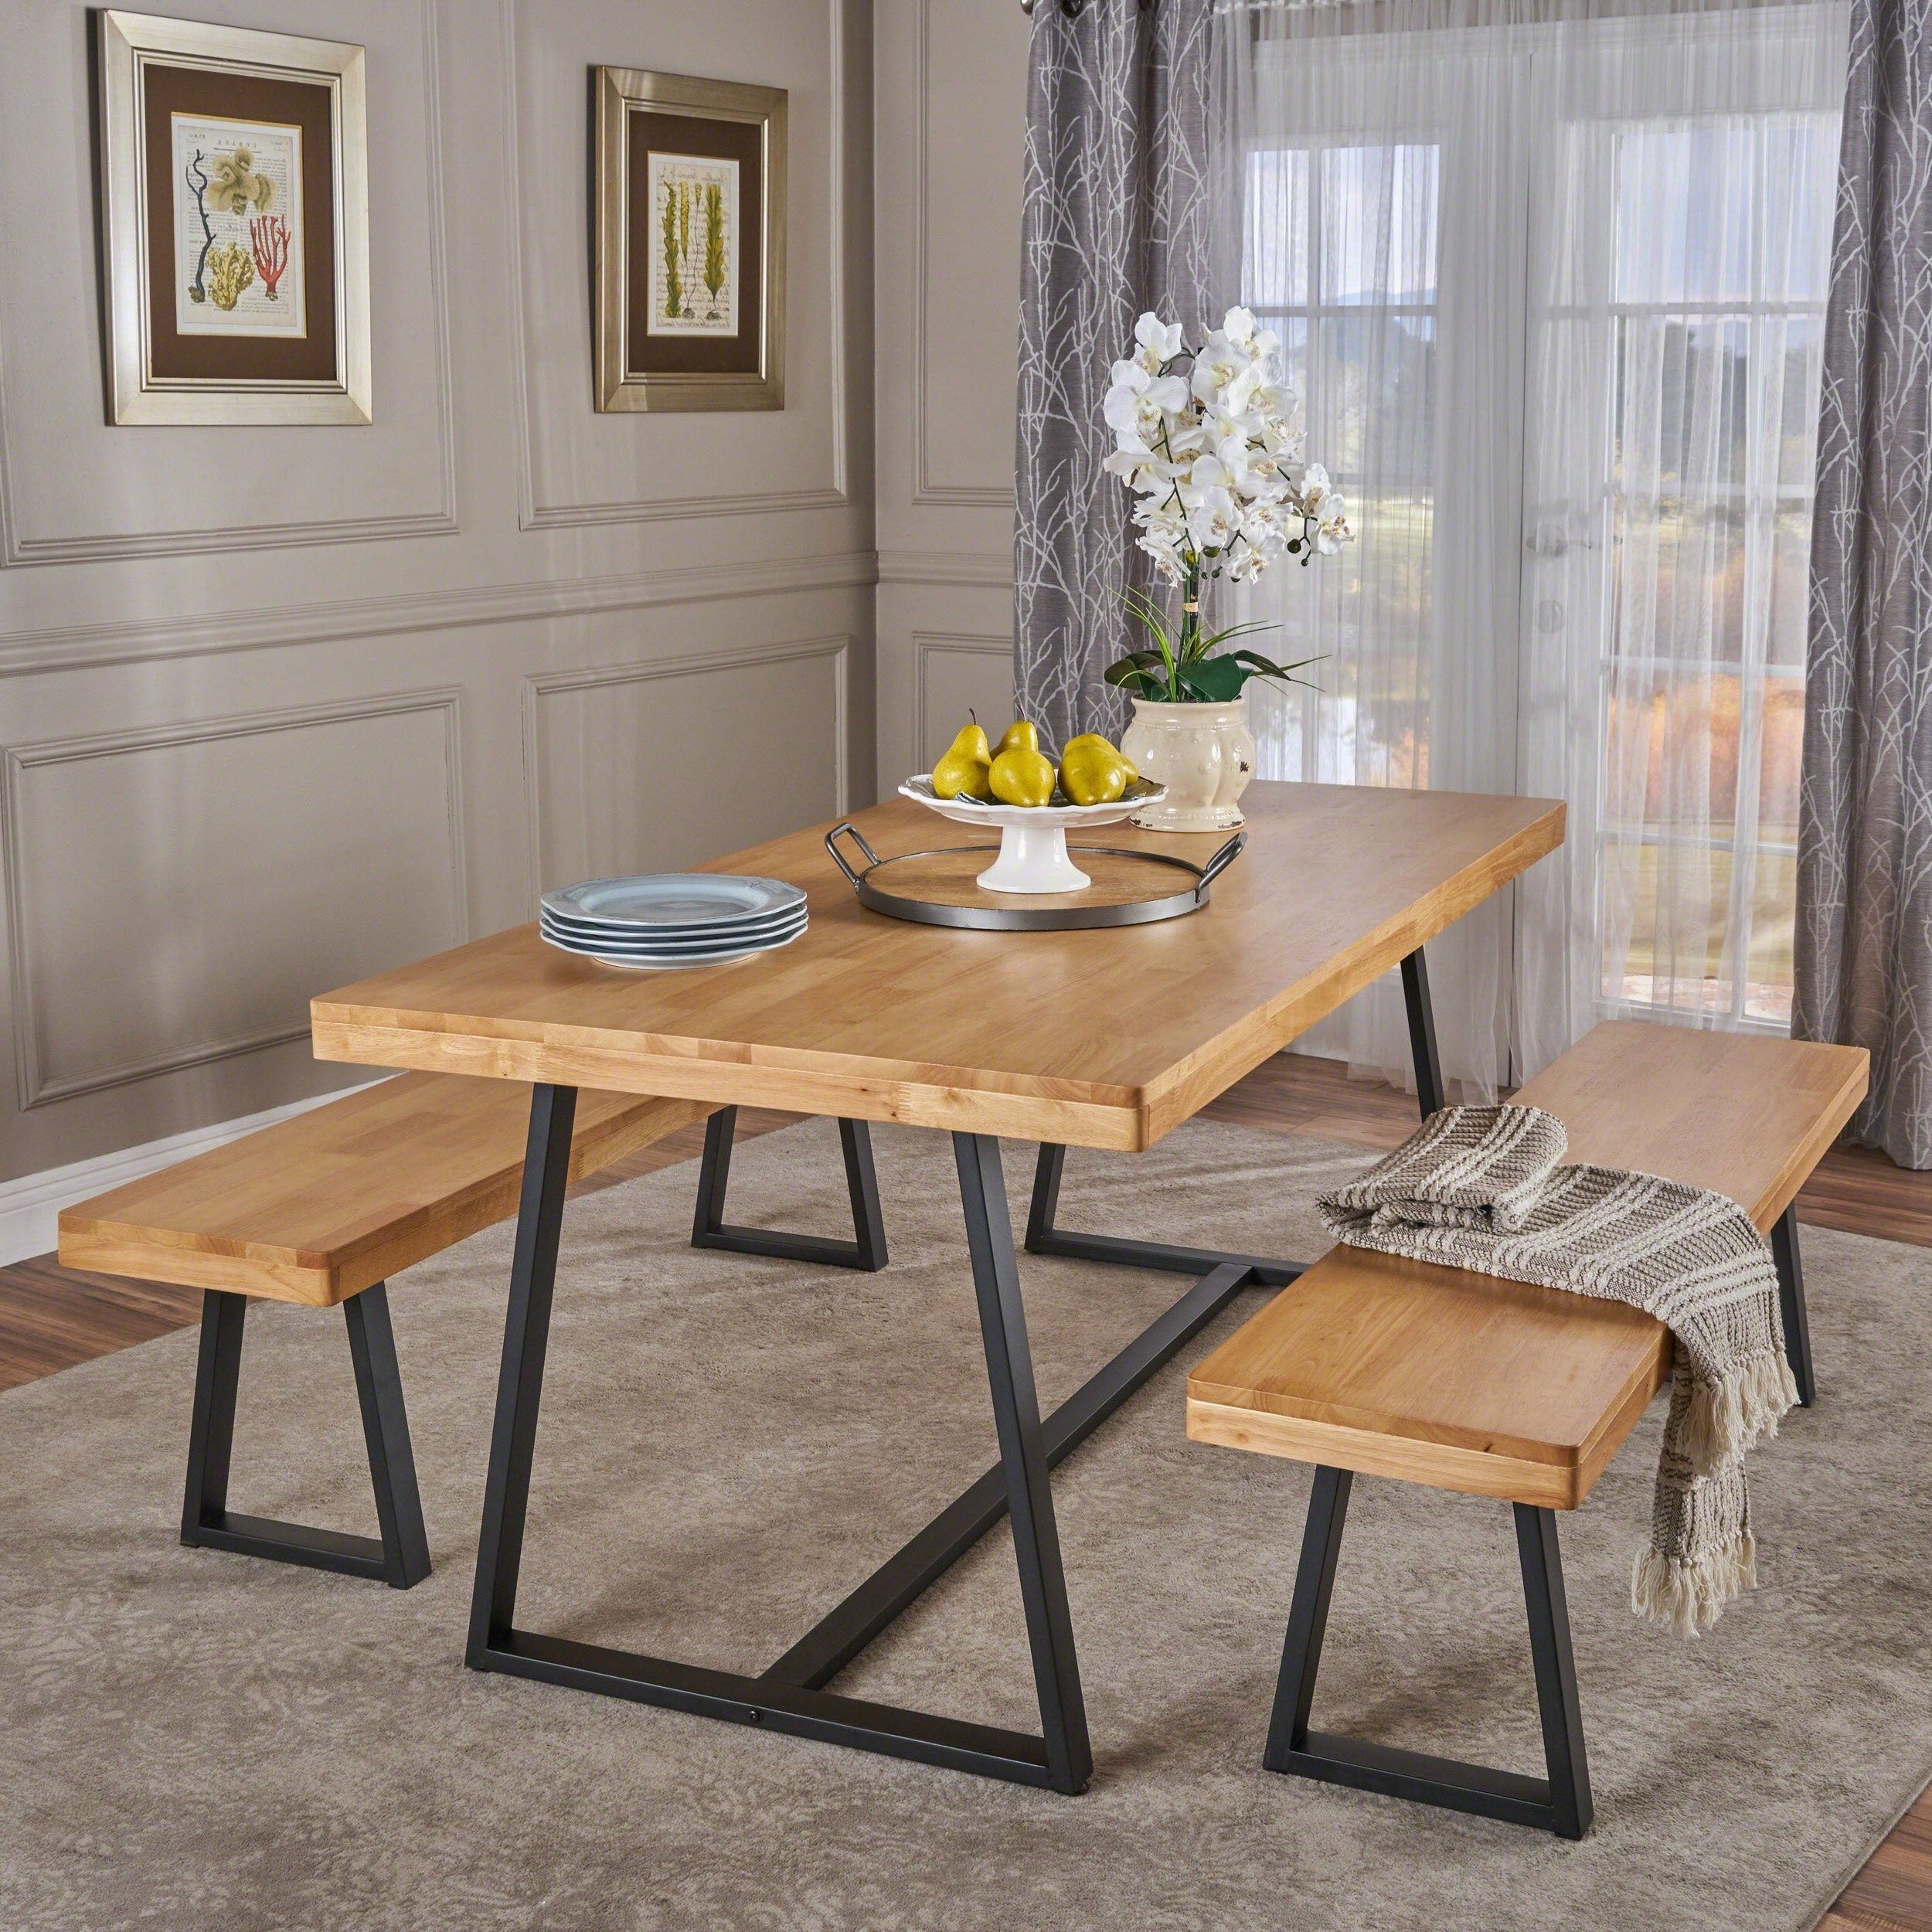 Our Throughout Falmer 3 Piece Solid Wood Dining Sets (View 15 of 20)